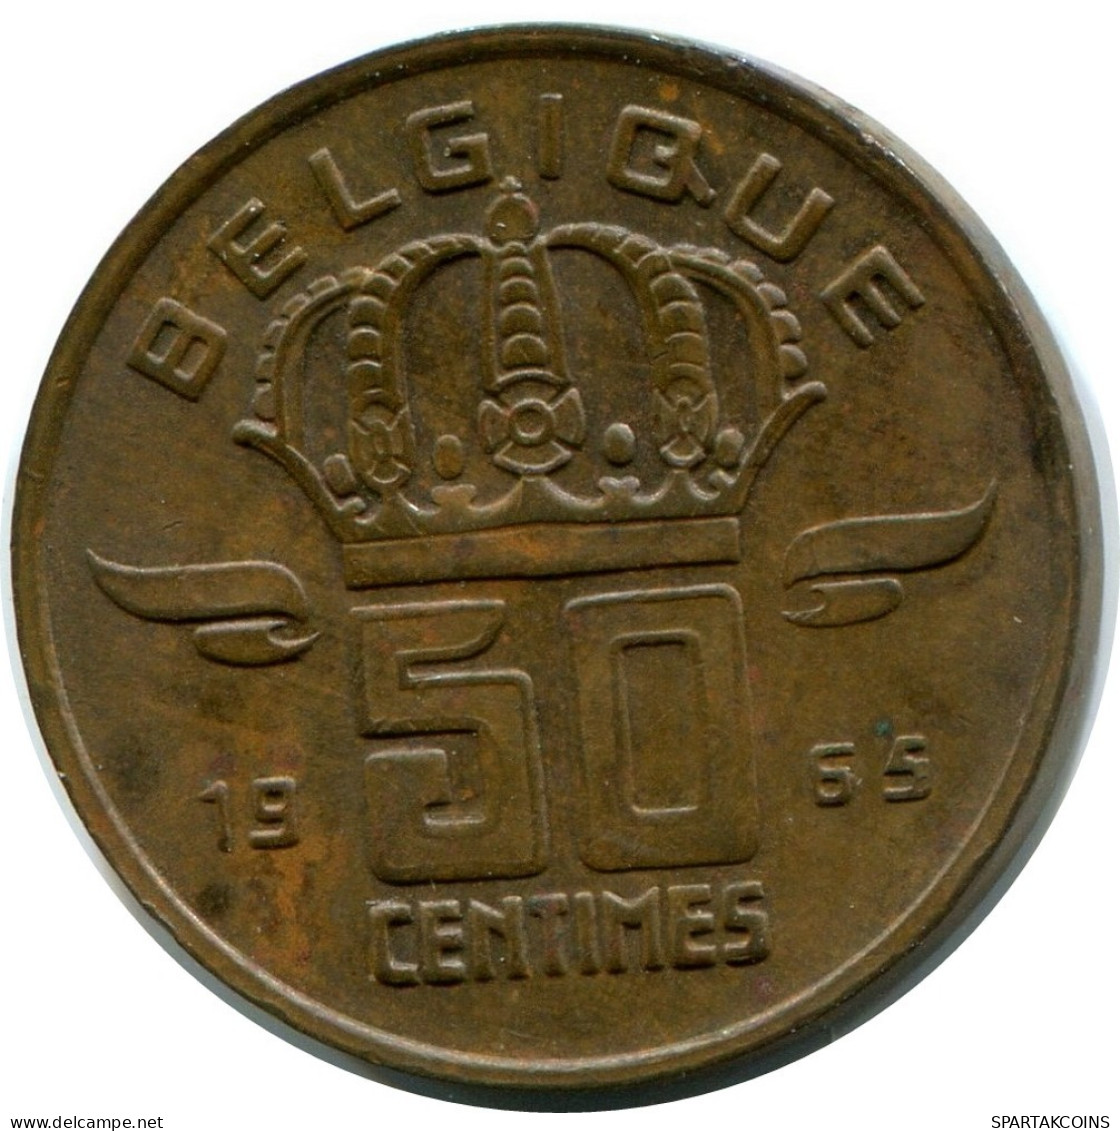 50 CENTIMES 1965 FRENCH Text BELGIUM Coin #AW923.U.A - 50 Cent